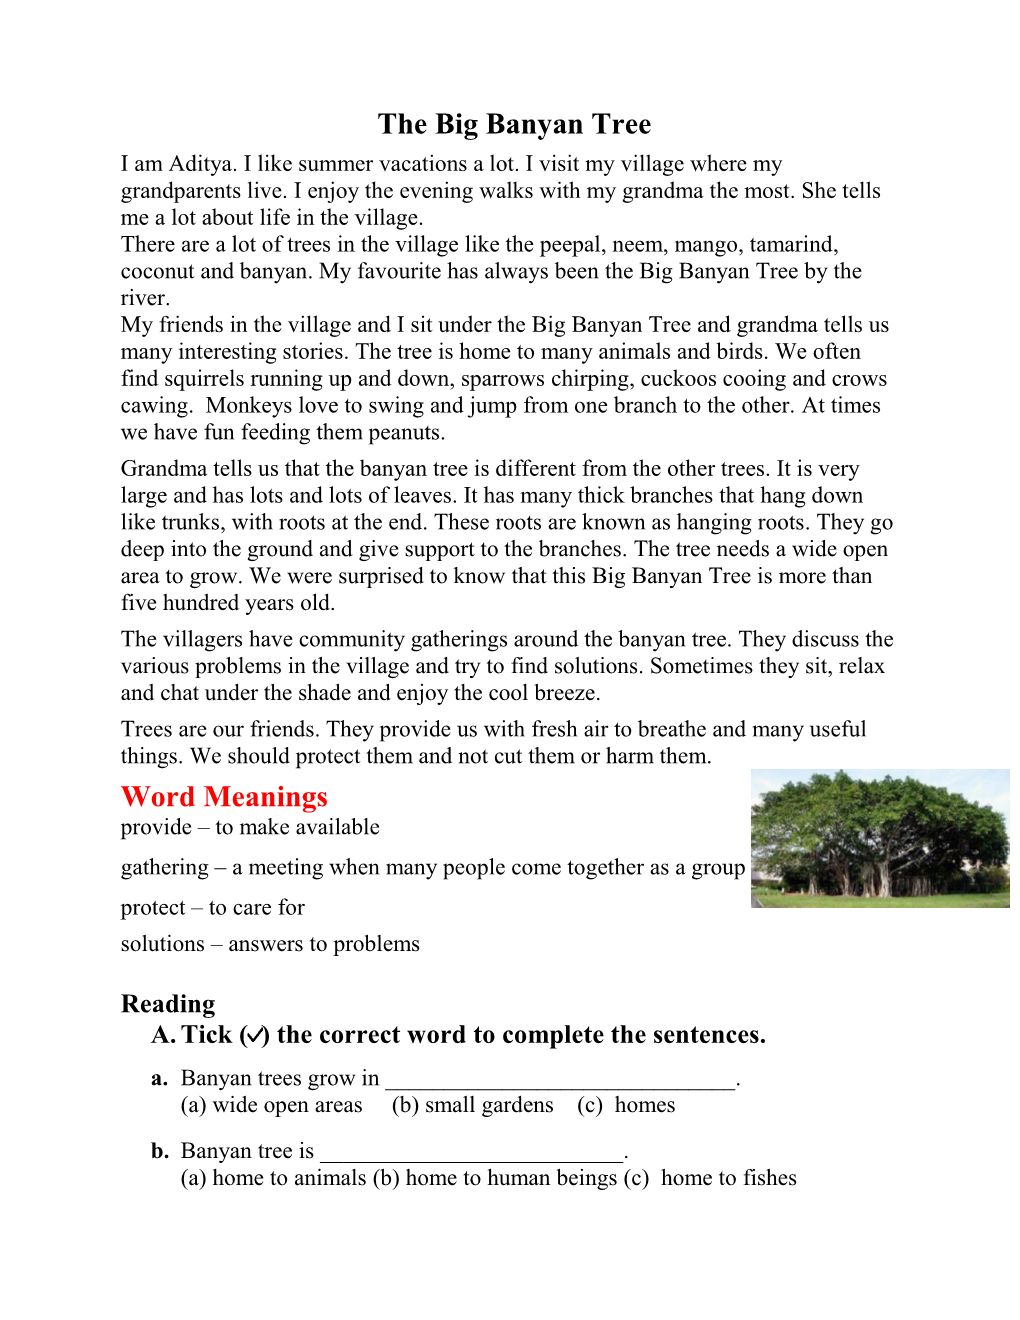 The Big Banyan Tree Word Meanings